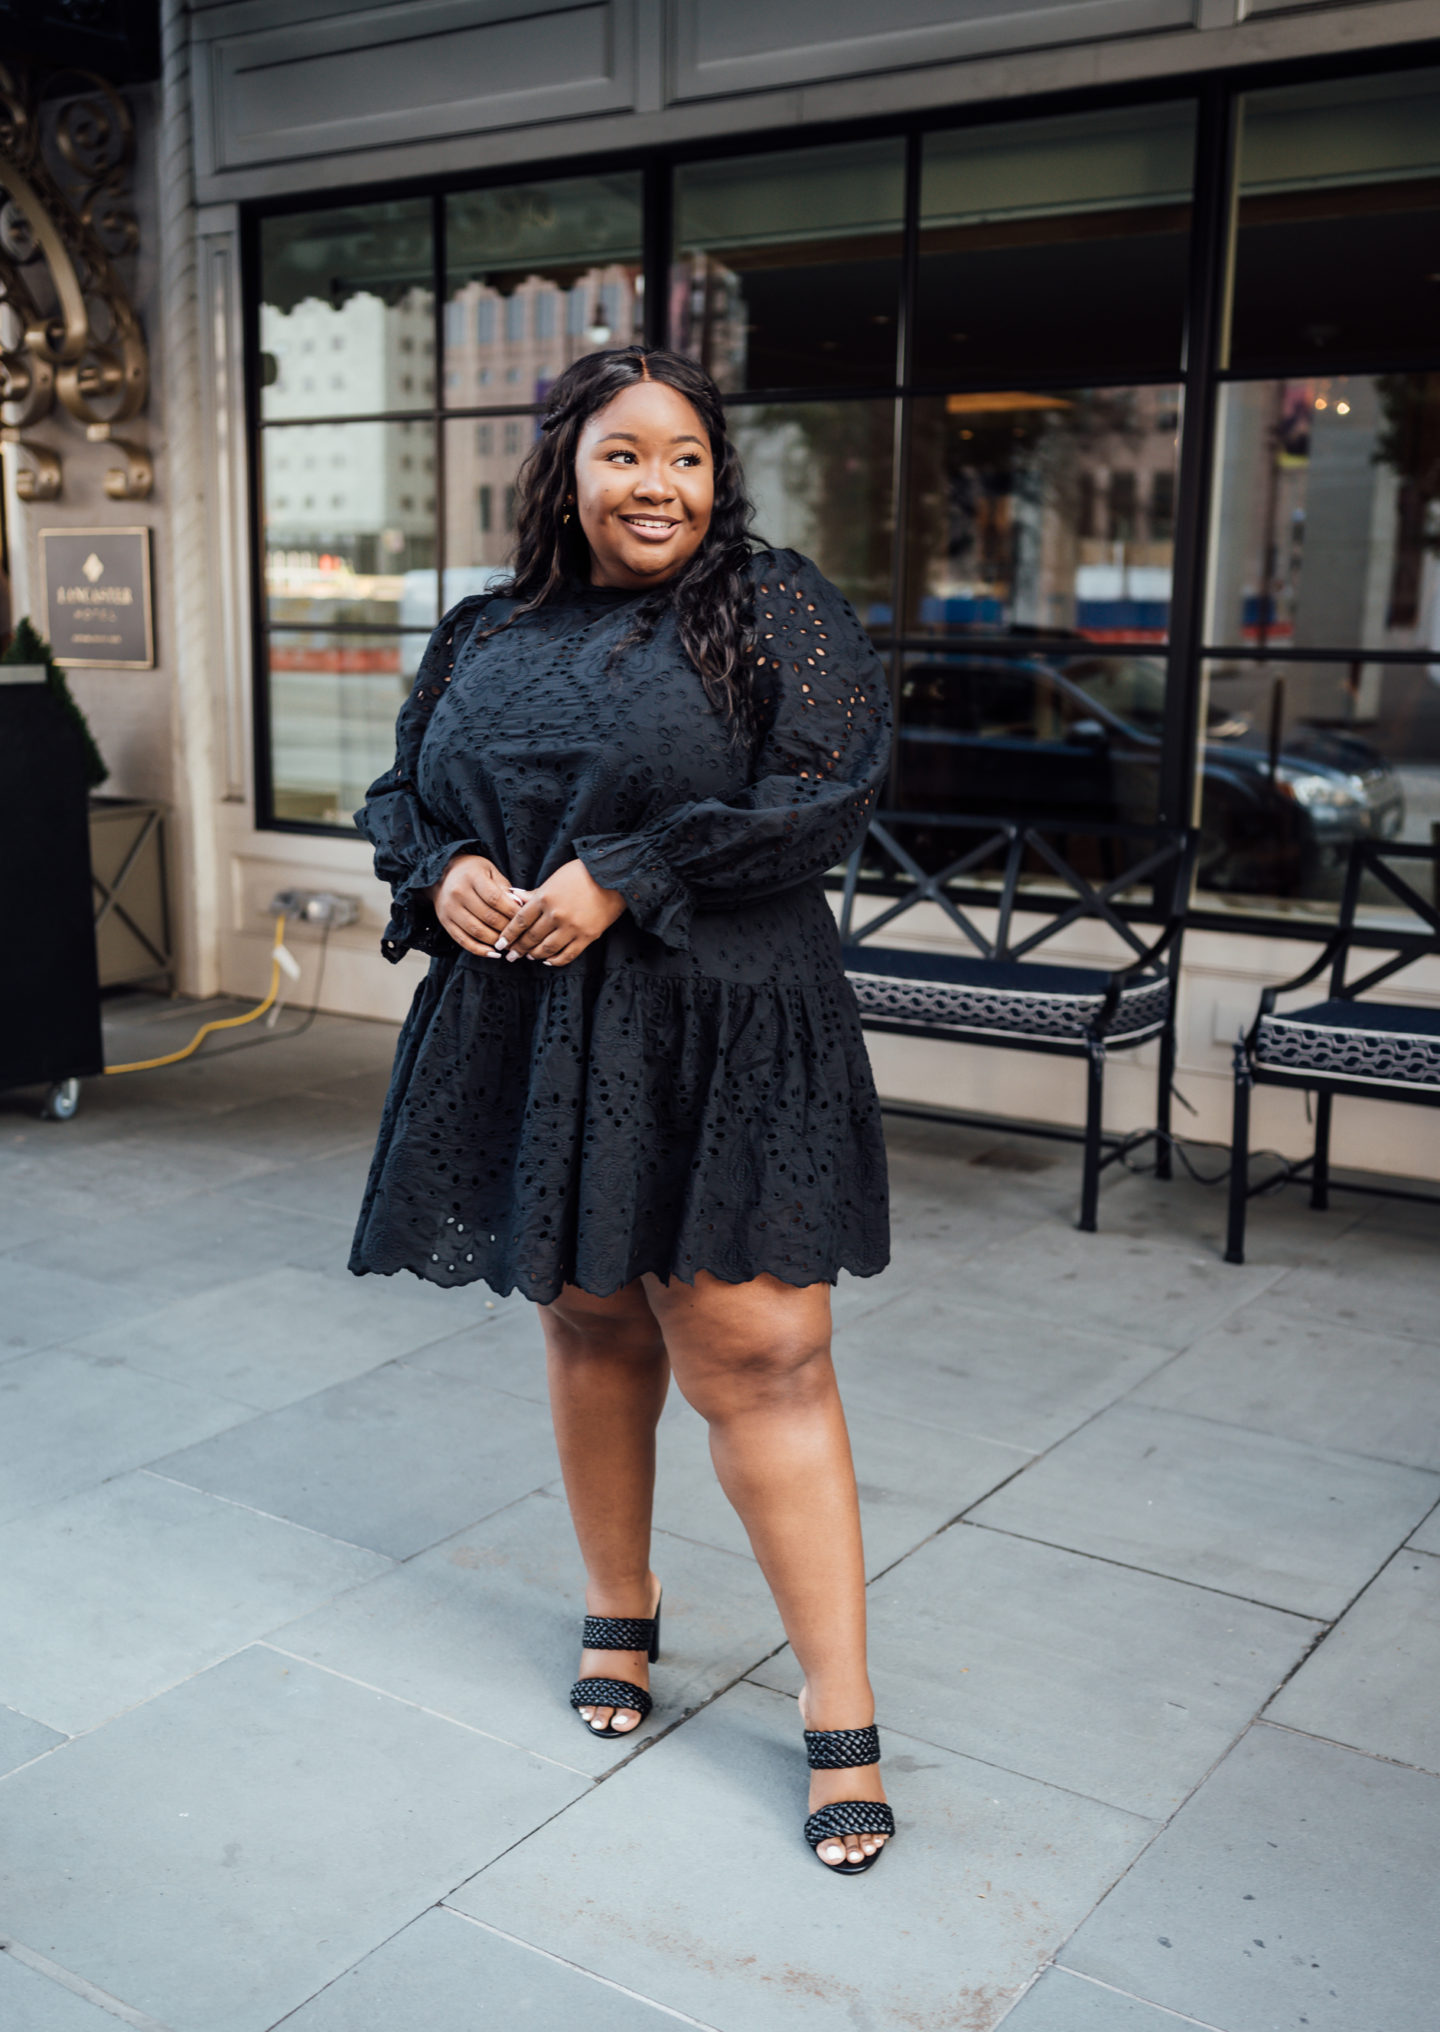 From Head to Curve in a black lace plus size dress for a date night outfit with braided amazon heels.